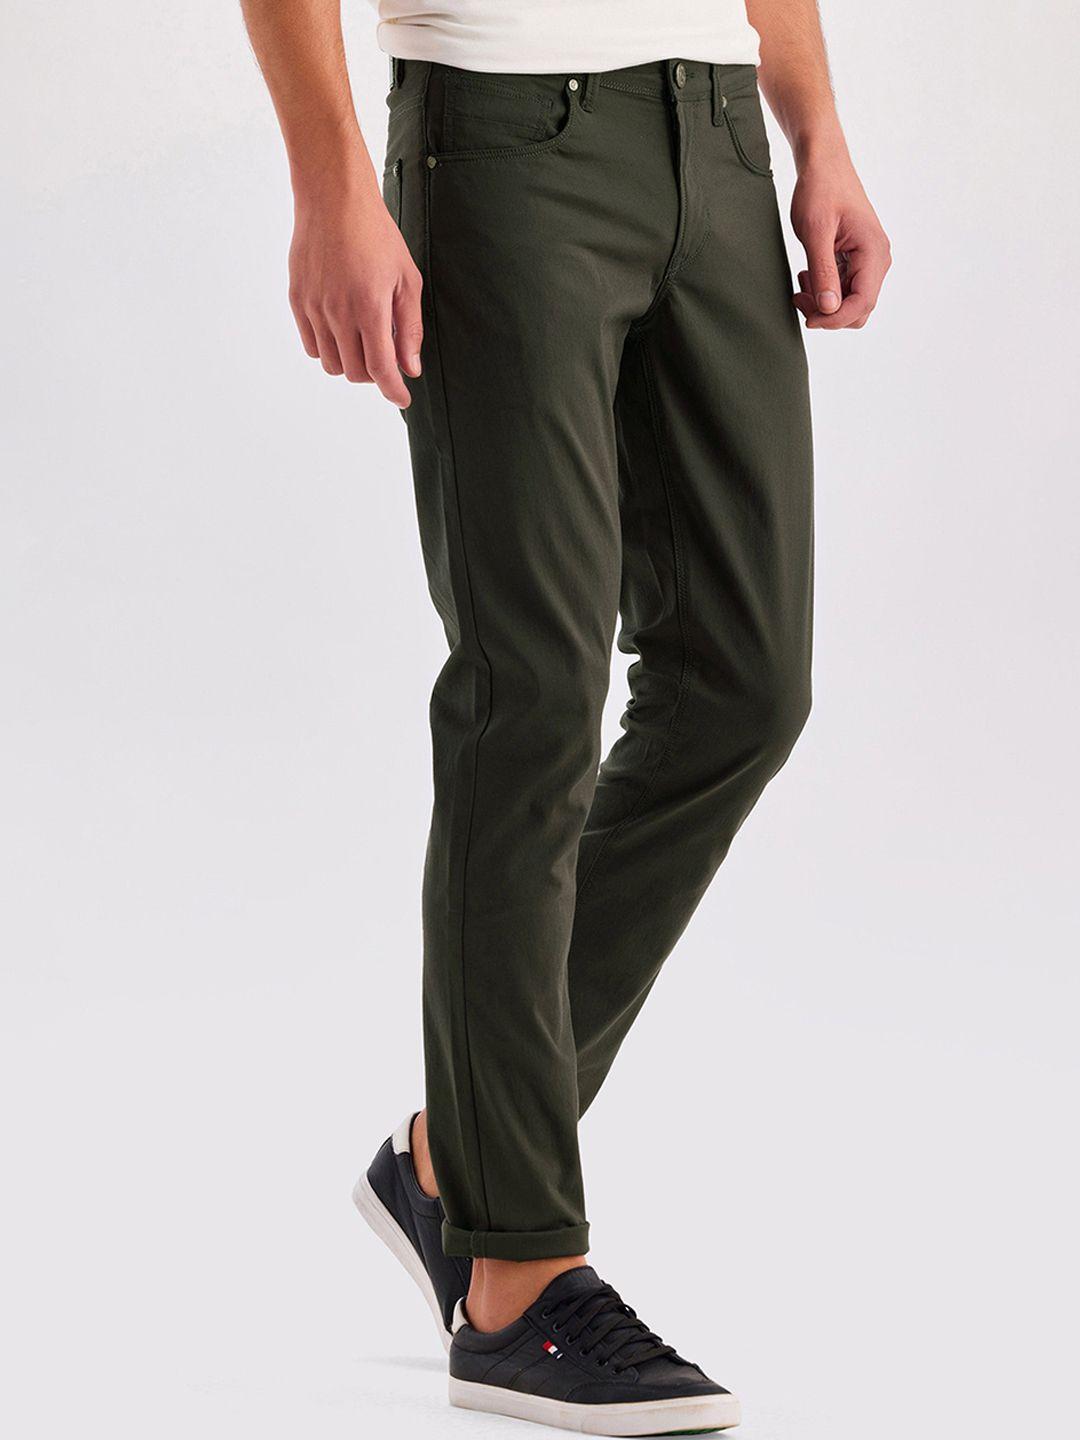 dagerrfly men slim fit mid-rise cotton stretchable regular trousers